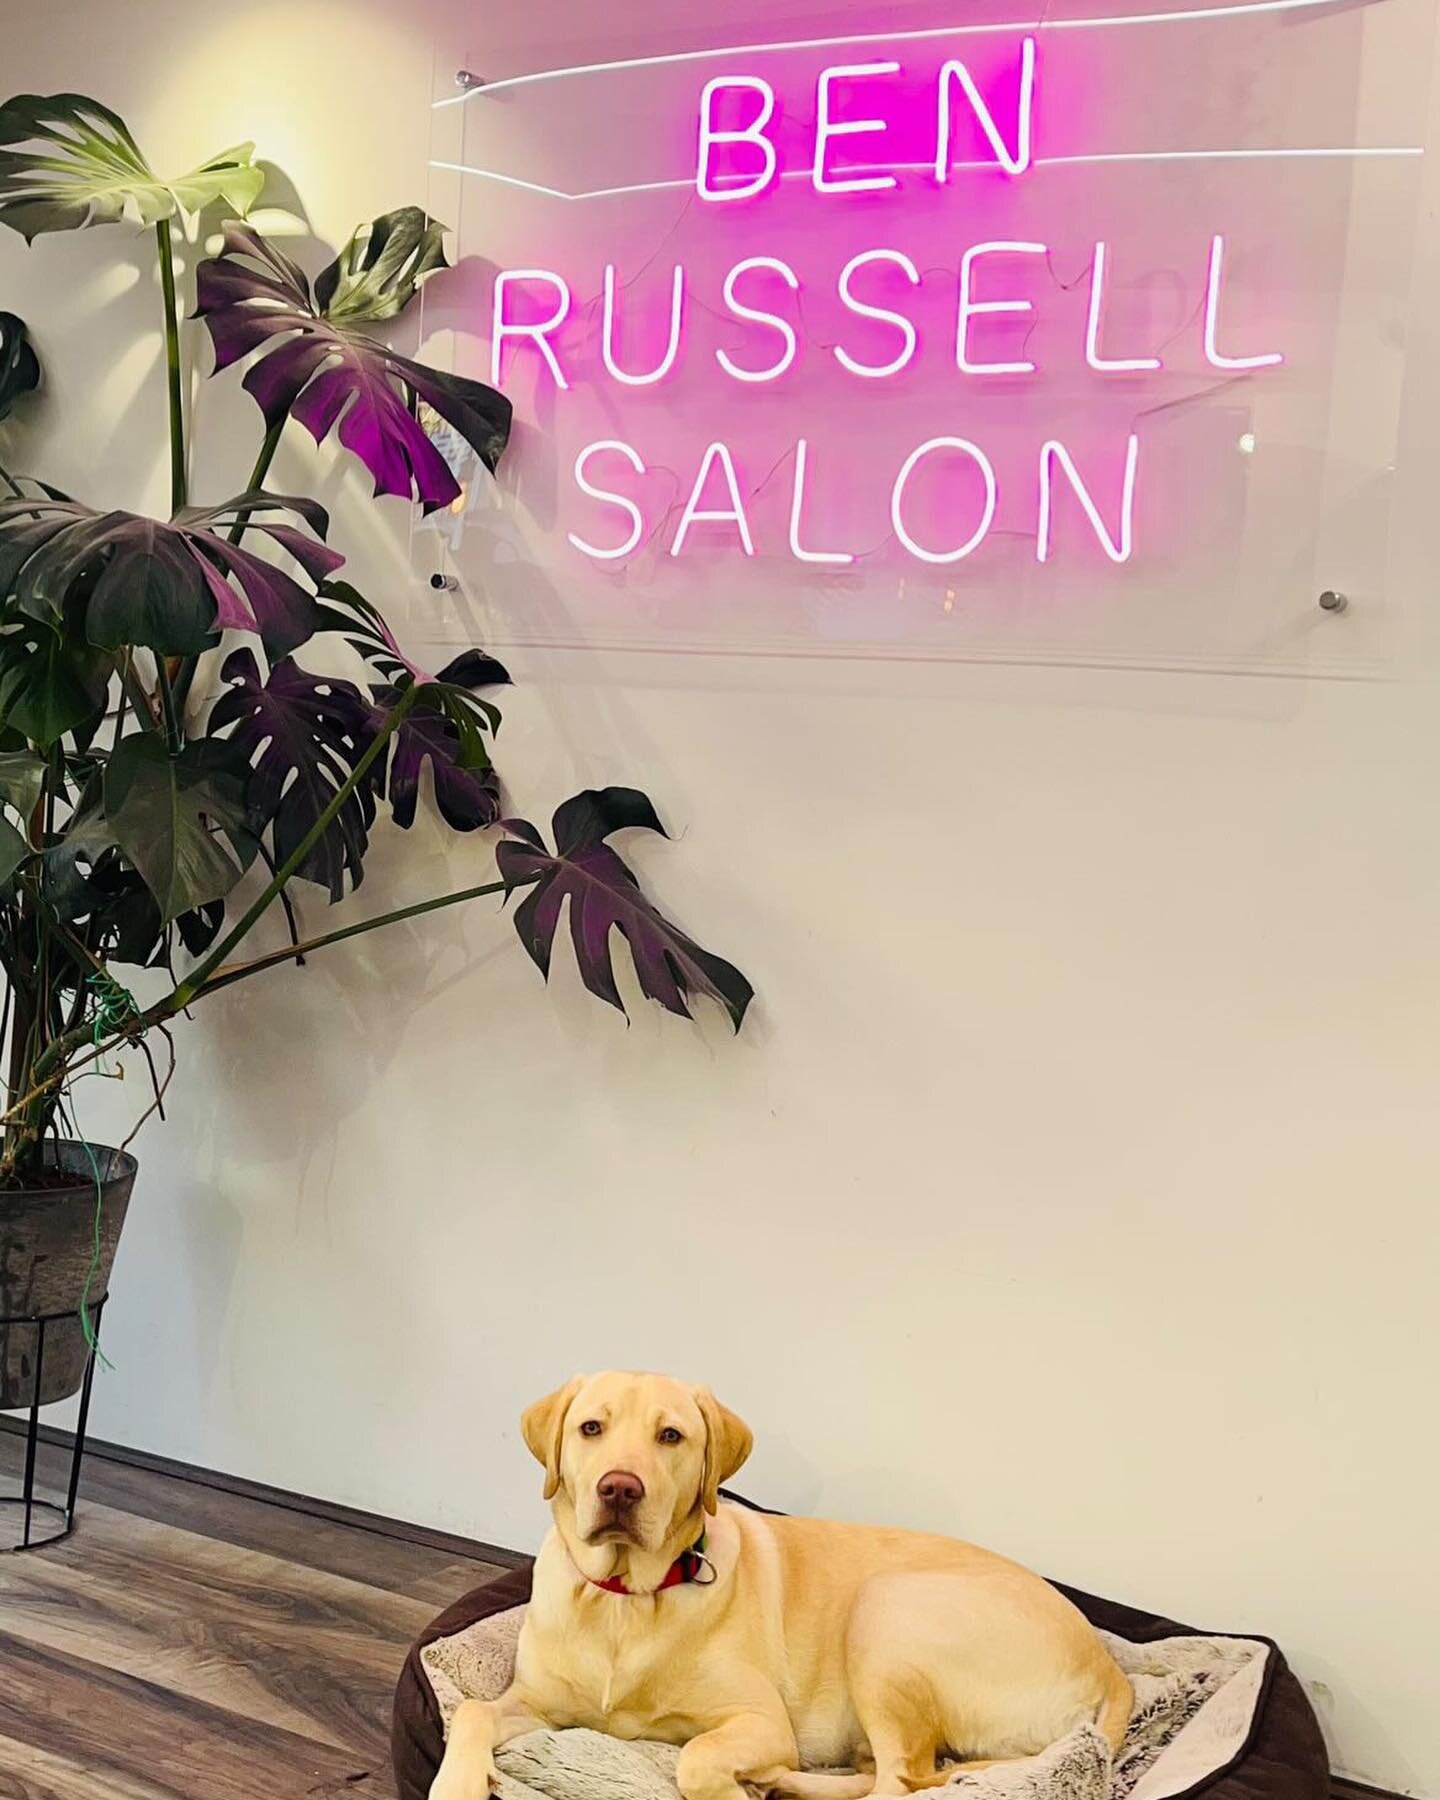 BACK TOMORROW 

MONDAY 8am-6pm
TUESDAY 9am-7pm
WEDNESDAY 9am-7pm
THURSDAY 8.30am-8.30pm
FRIDAY 8am-7.30pm
SATURDAY 7am-3pm

🏳️&zwj;🌈
#BENRUSSELLSALON 
#BENRUSSELLHAIR 
For bookings 
call 01460 55686 
Click the link  in the